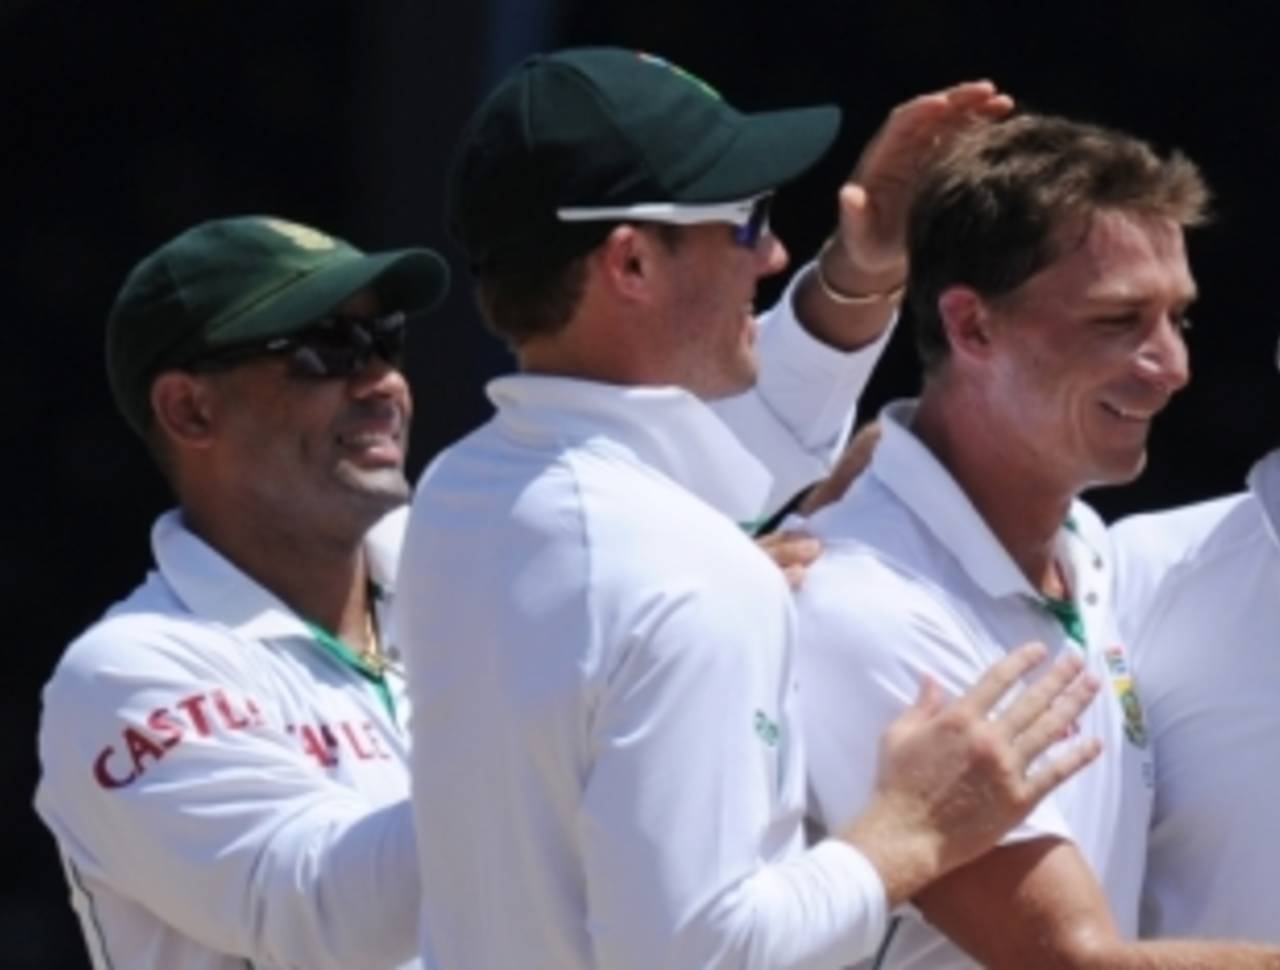 Dale Steyn is congratulated by his team-mates after reaching 200 Test wickets, West Indies v South Africa, 1st Test, Trinidad, June 12, 2010